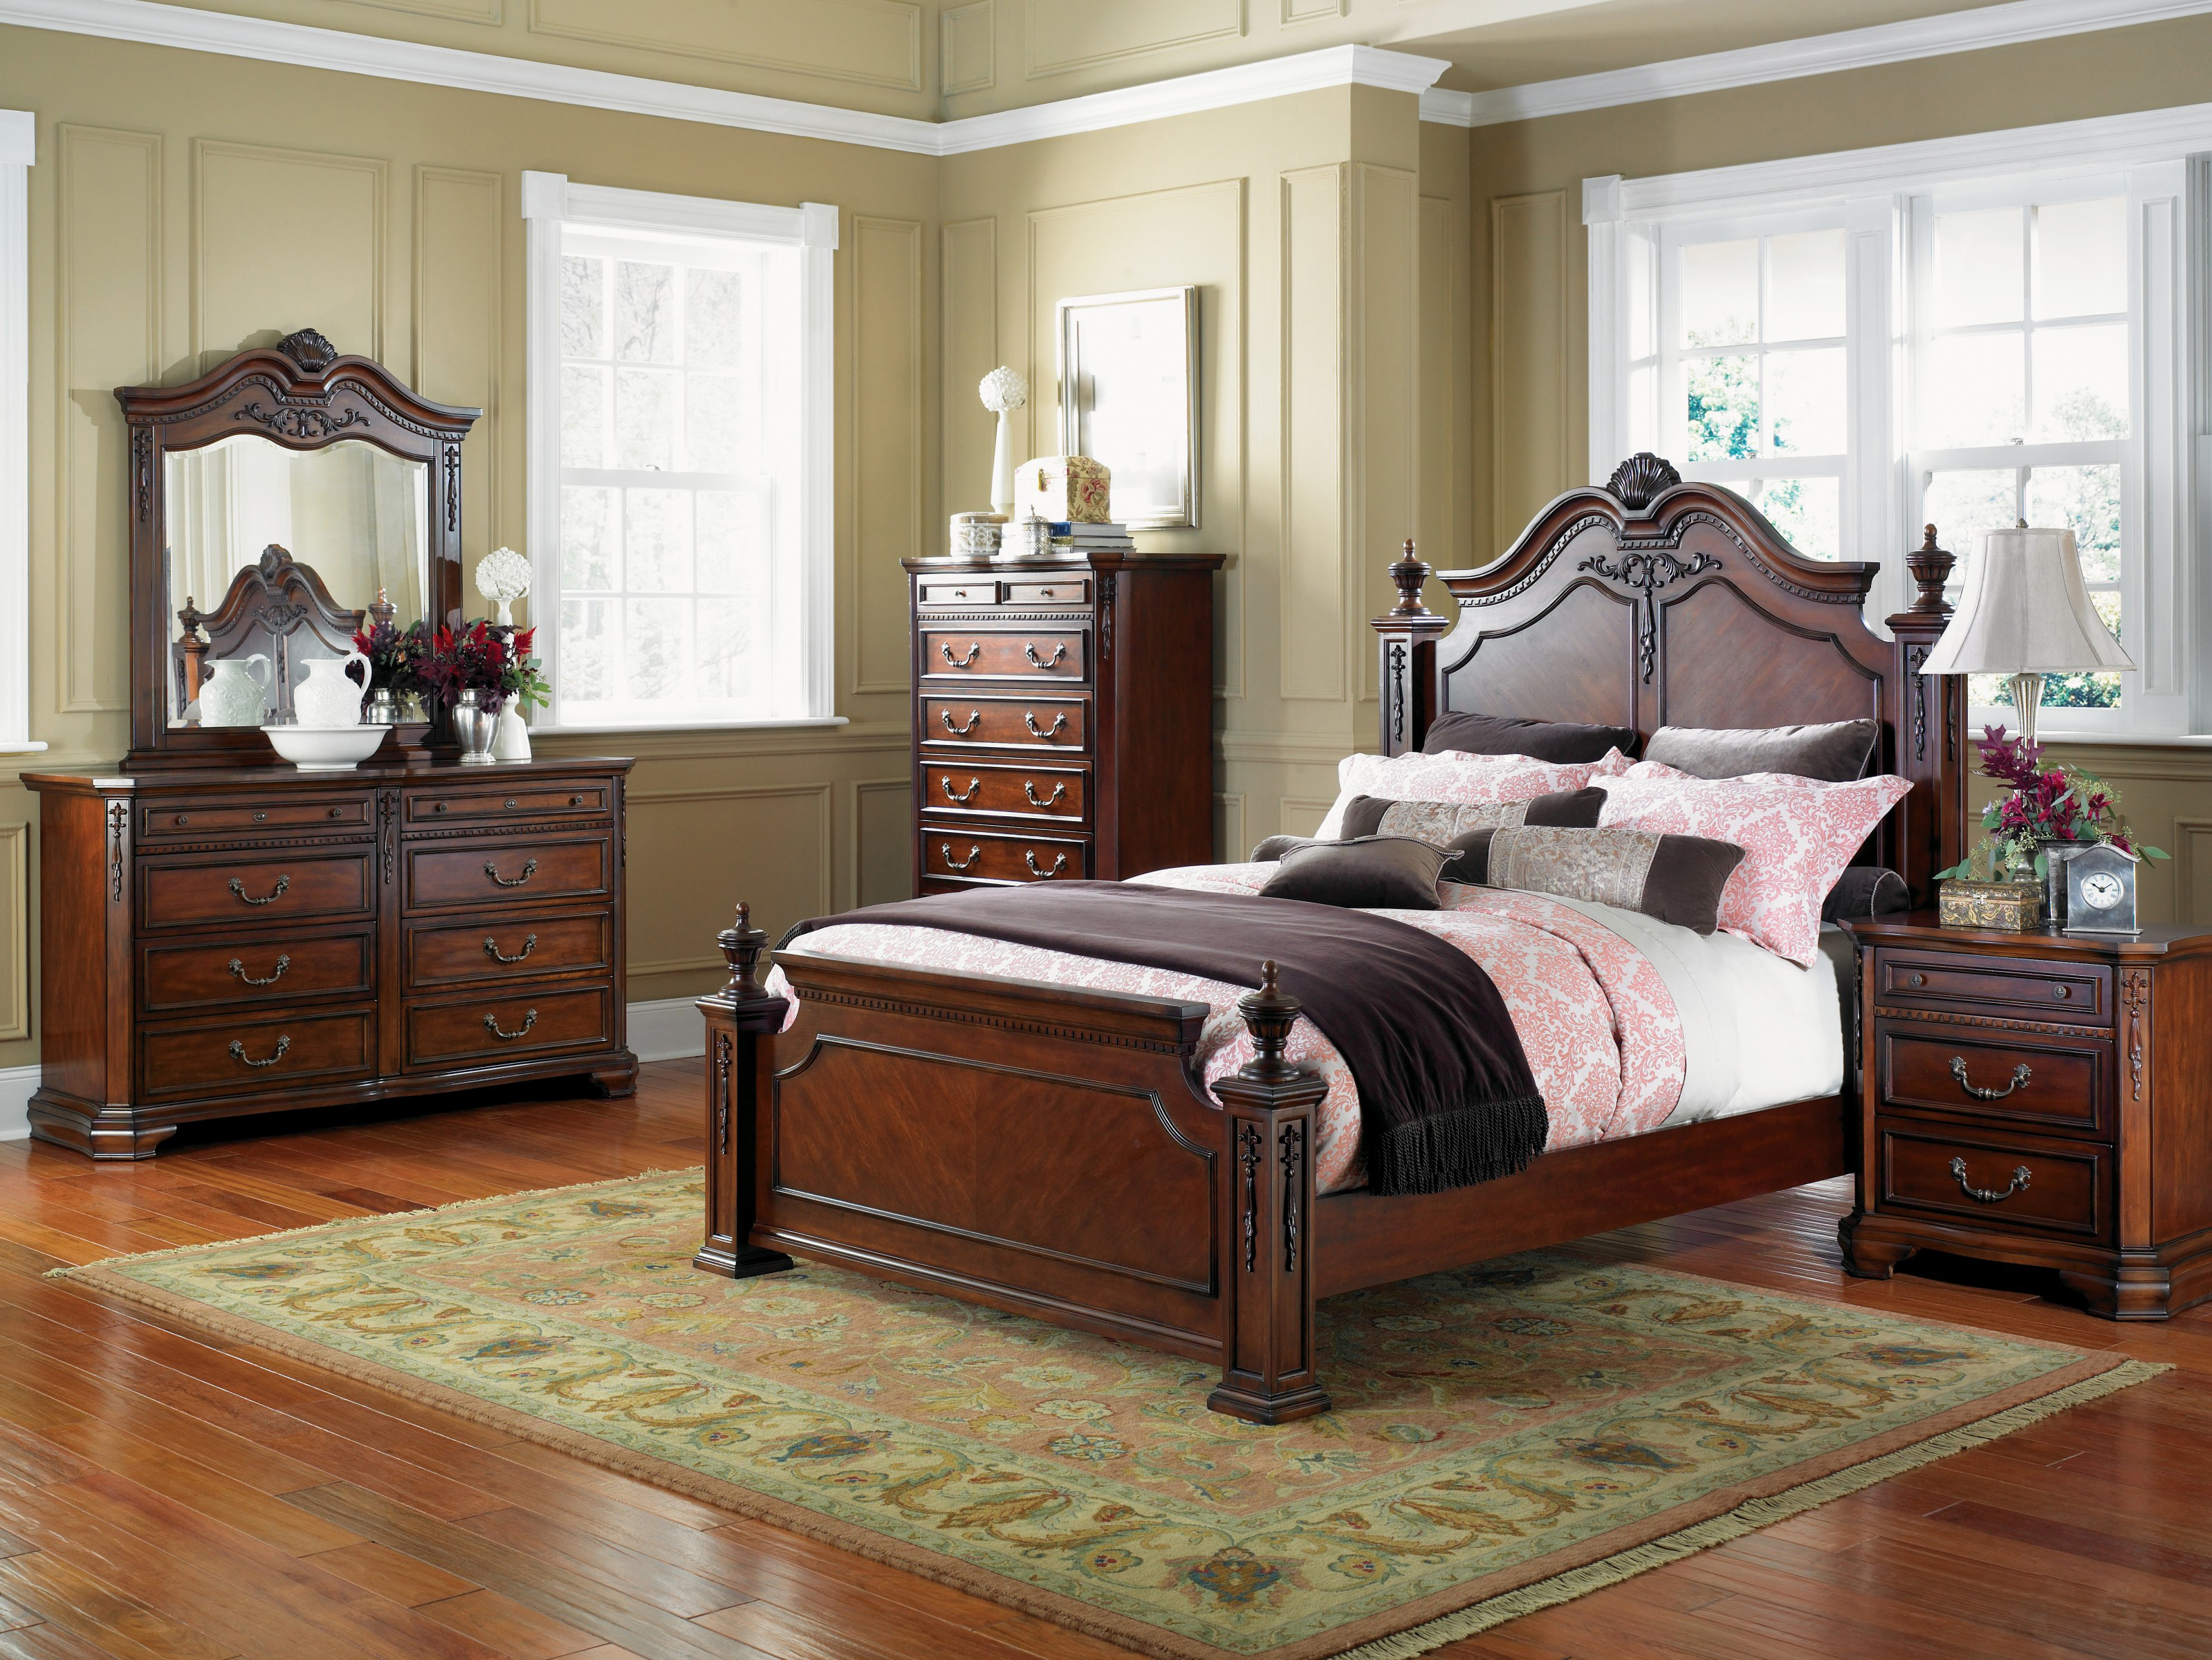 Teak Wood Furniture – The Most Durable Choice For Redecorating Your Homes